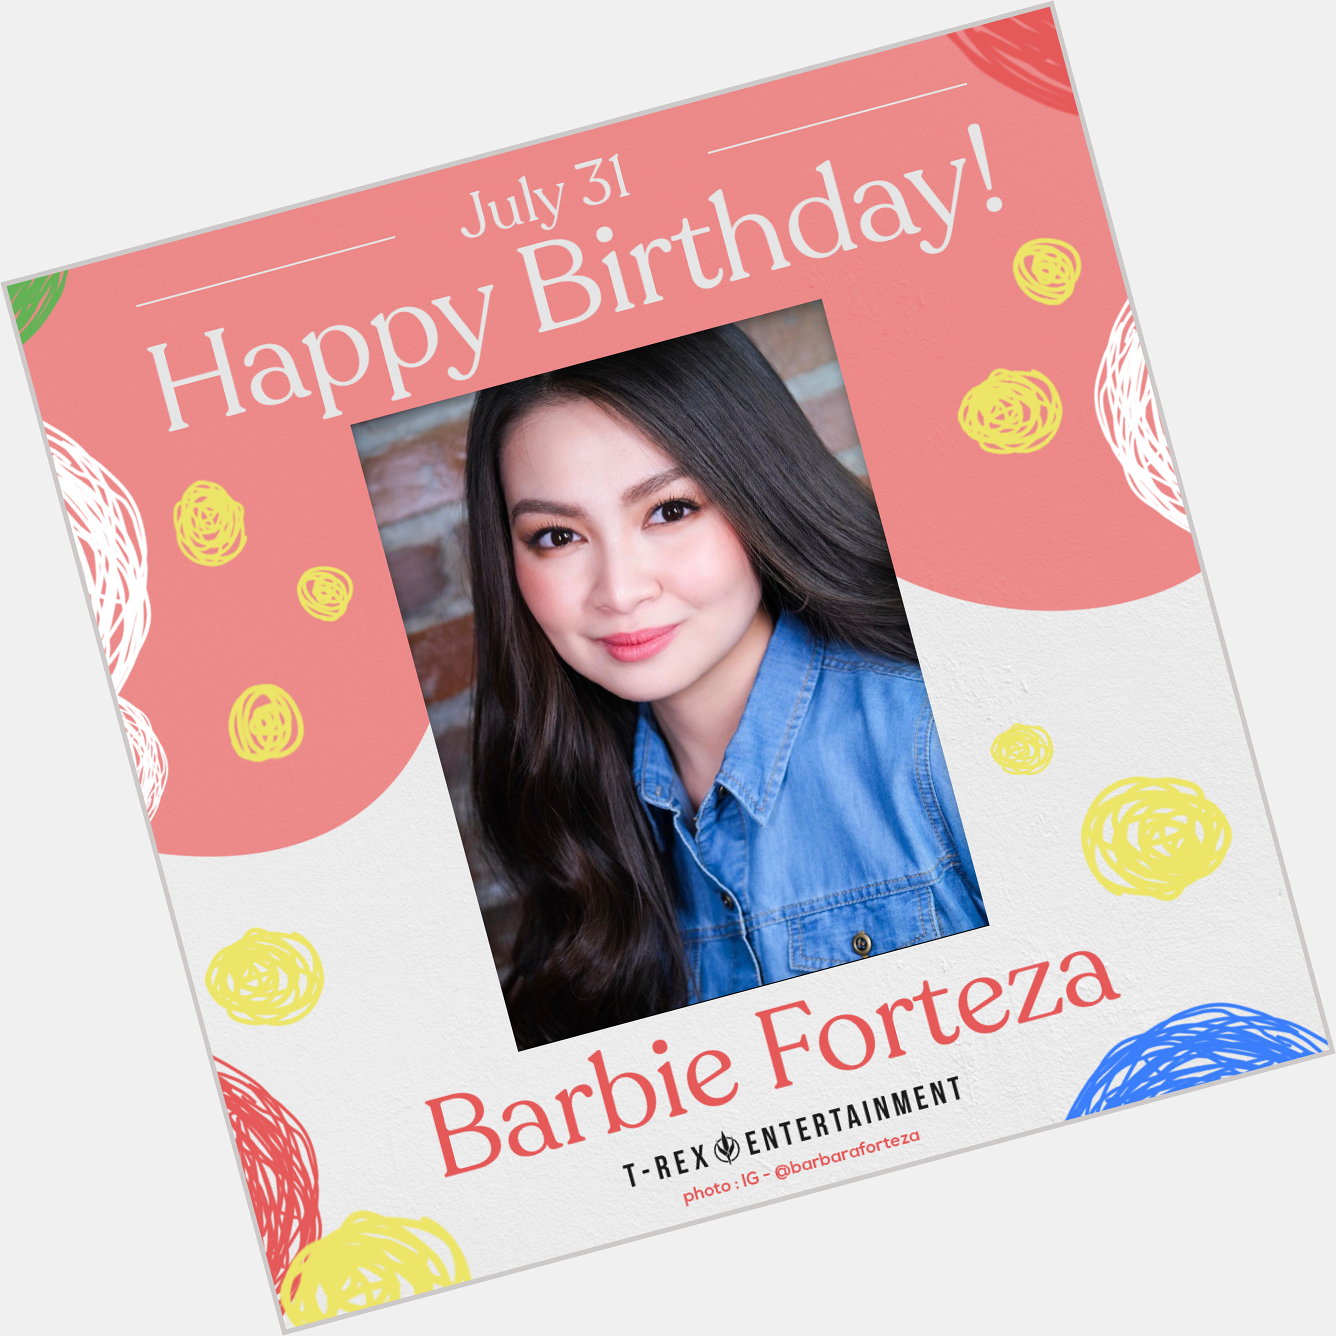 Happy 23rd birthday, Barbie Forteza  We hope all your birthday wishes come true. 